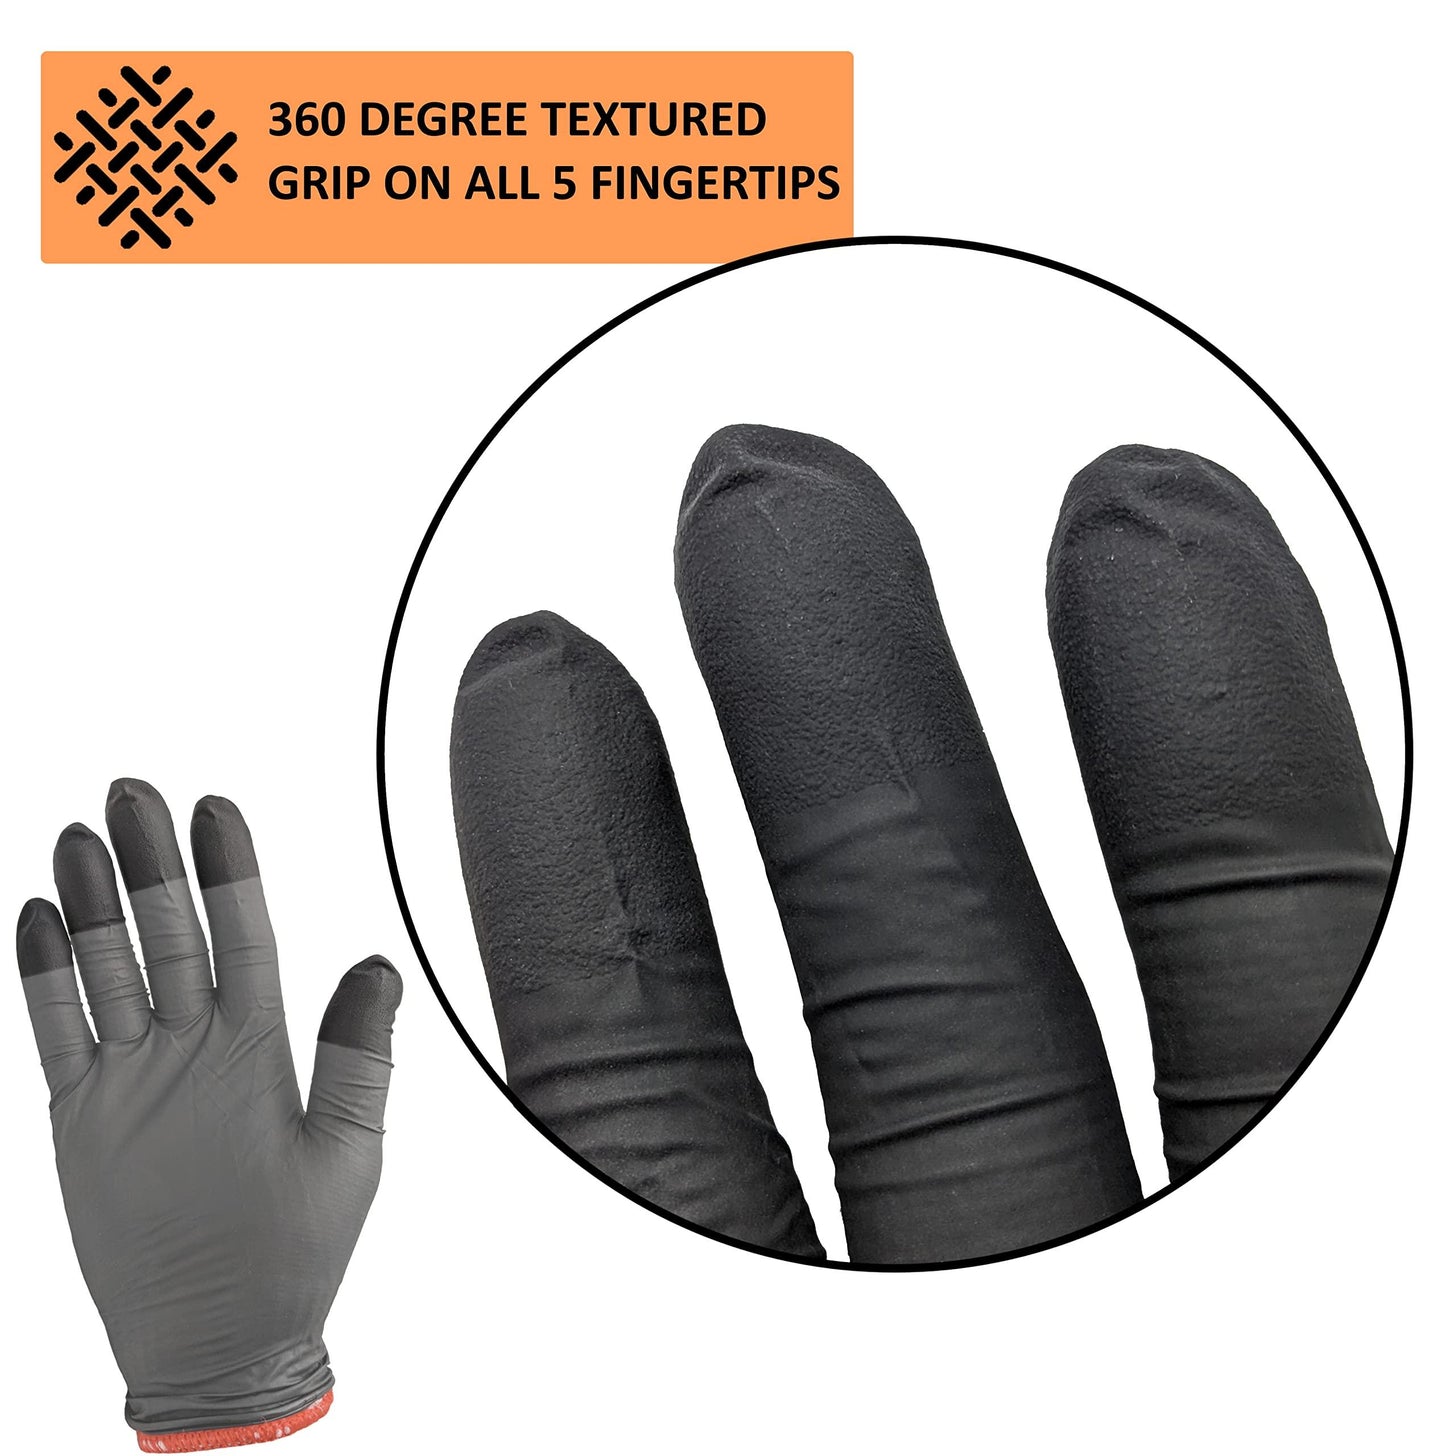 Black Disposable BBQ Gloves Kit with 50 Heavy Duty Textured Fingertip Grips and 2 Heat Resistant, Washable, Reusable Glove Liners for Grill BBQ Cooking Gloves, Meat Gloves for Pulling Meat - CookCave